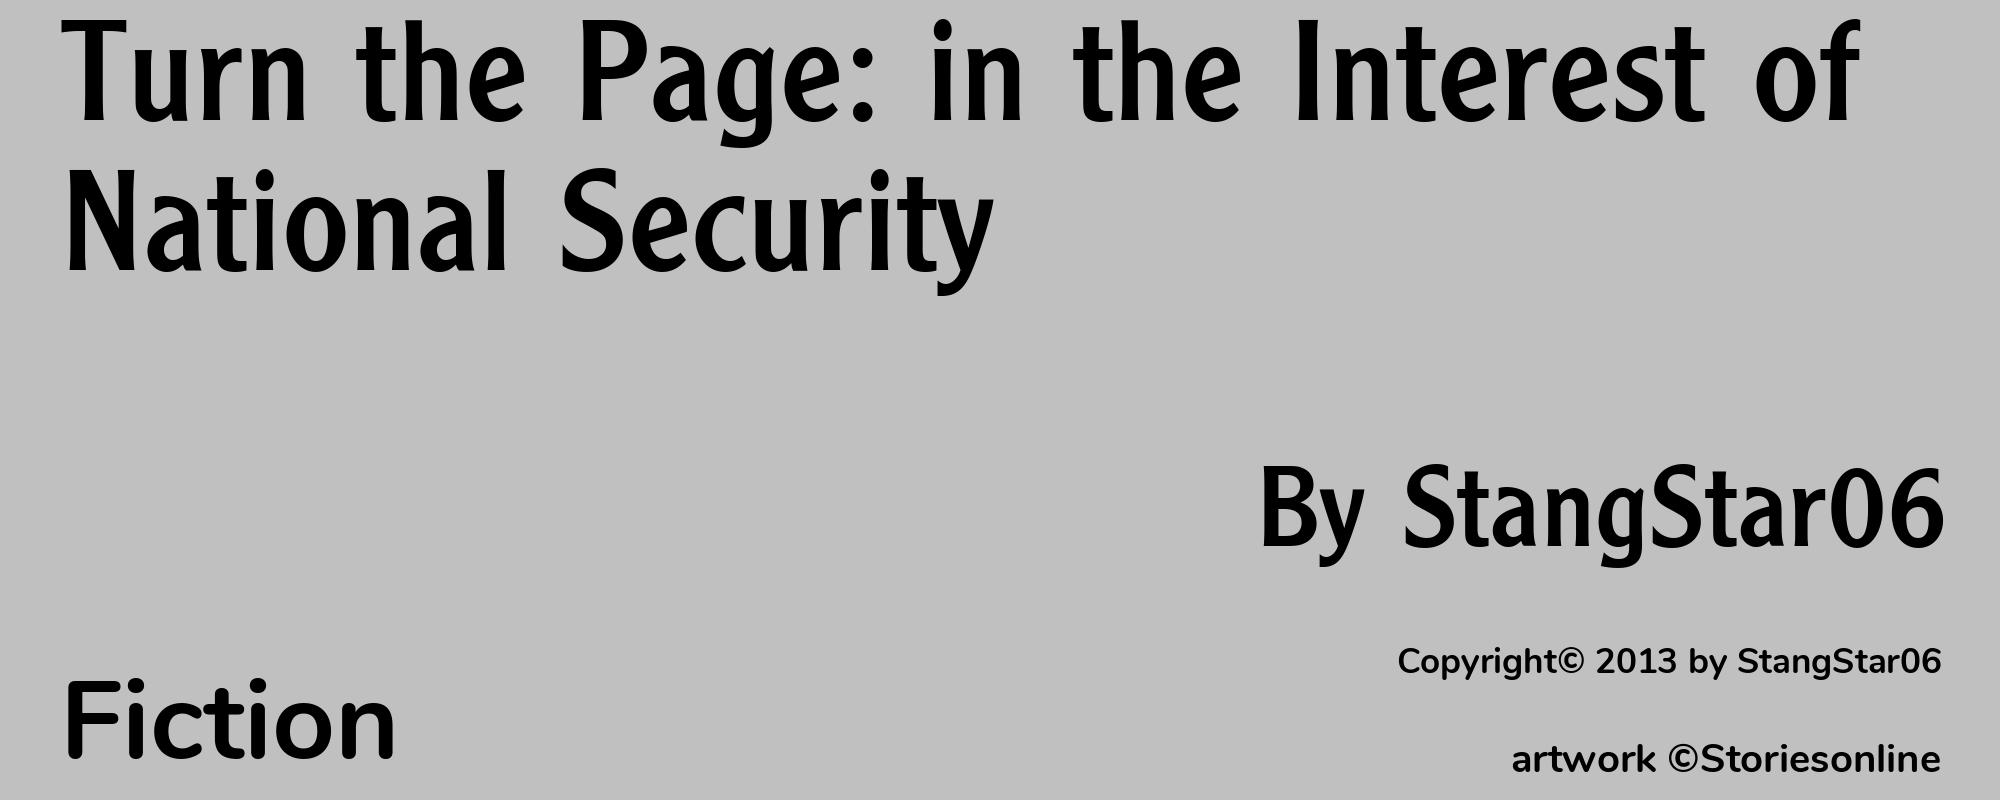 Turn the Page: in the Interest of National Security - Cover